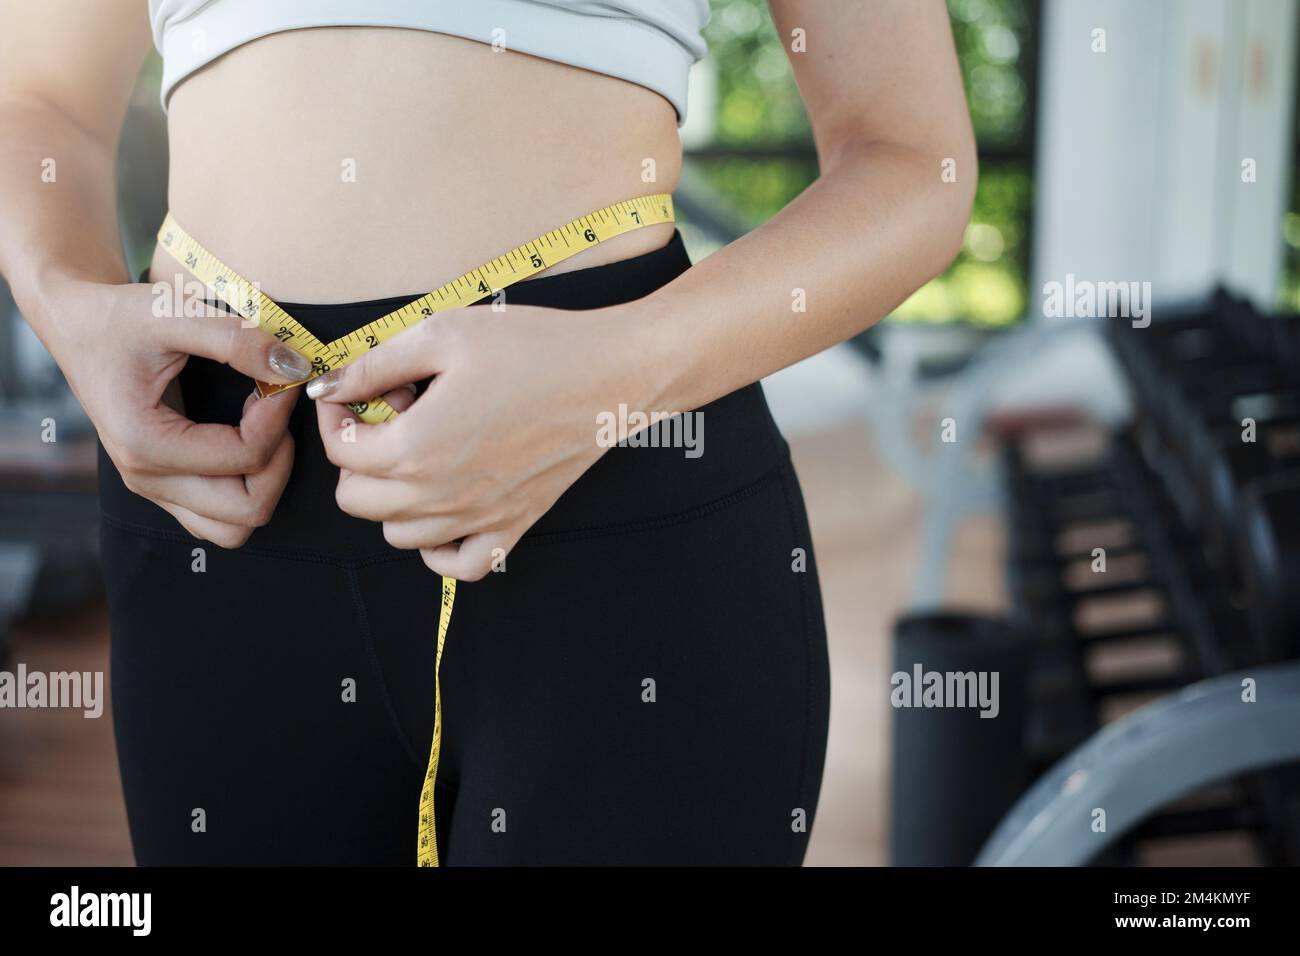 https://c8.alamy.com/comp/2M4KMYF/young-woman-measuring-her-waist-by-measure-tape-at-the-gym-2M4KMYF.jpg